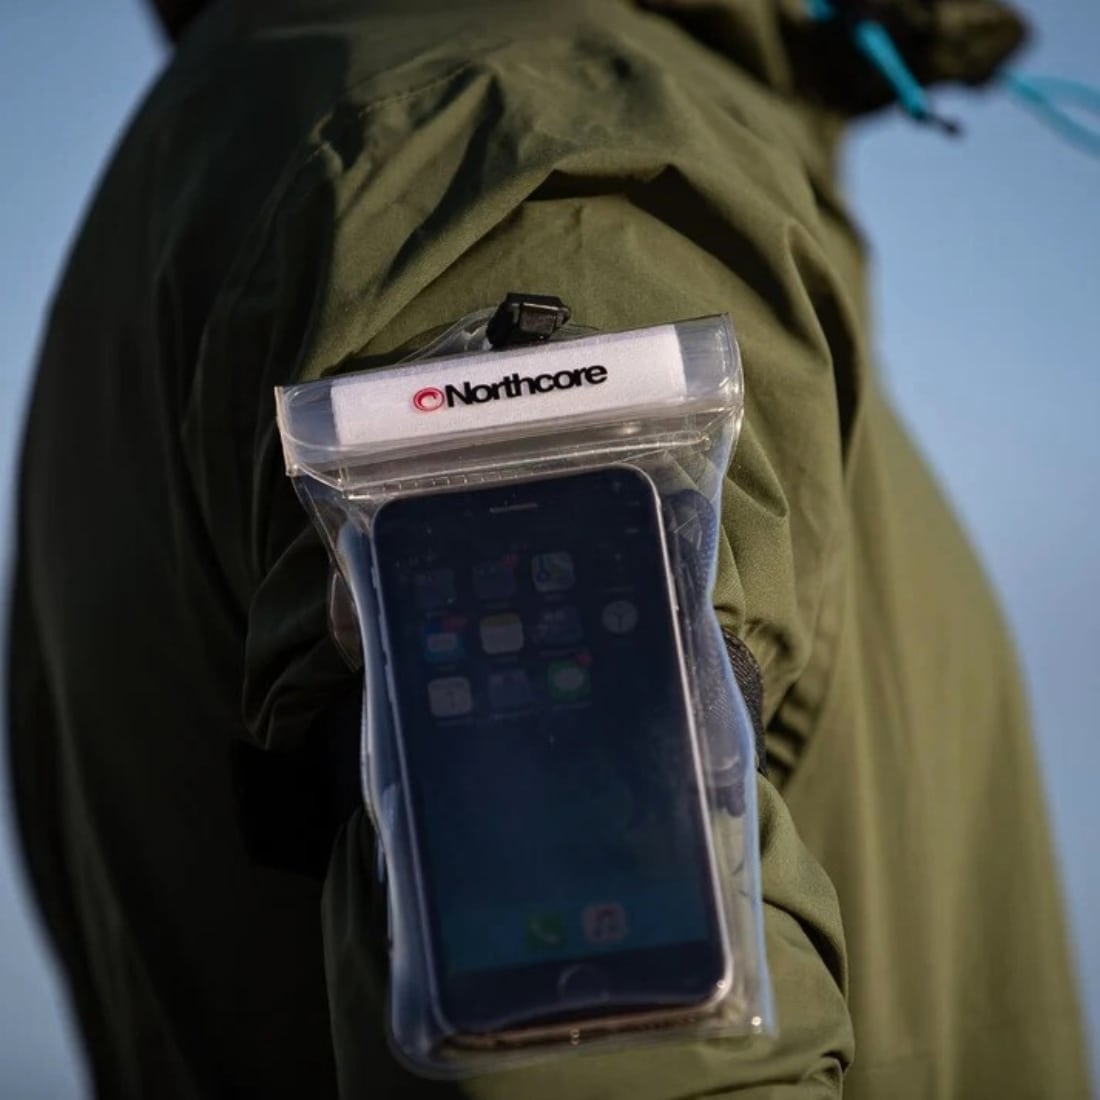 Northcore Waterproof Key &amp; Mobile Phone Pouch - Clear - Wet/Dry Bag by Northcore Large